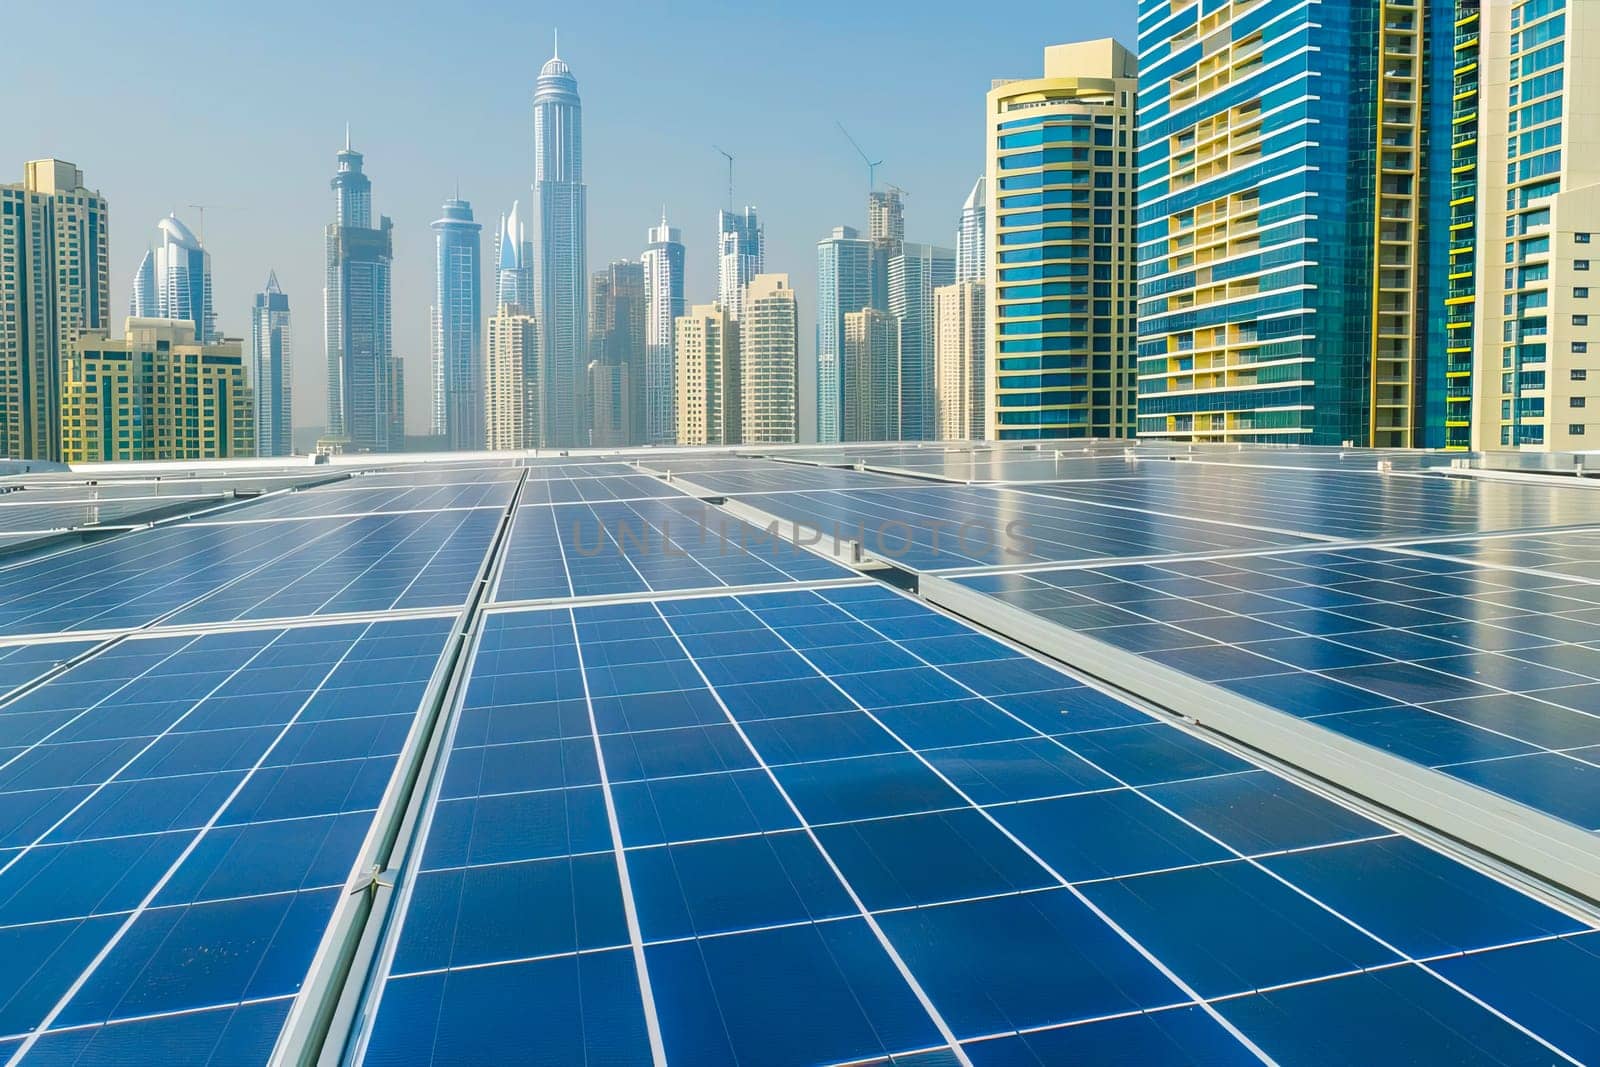 Solar panels on a buildings roof with urban skyscrapers visible in the background.